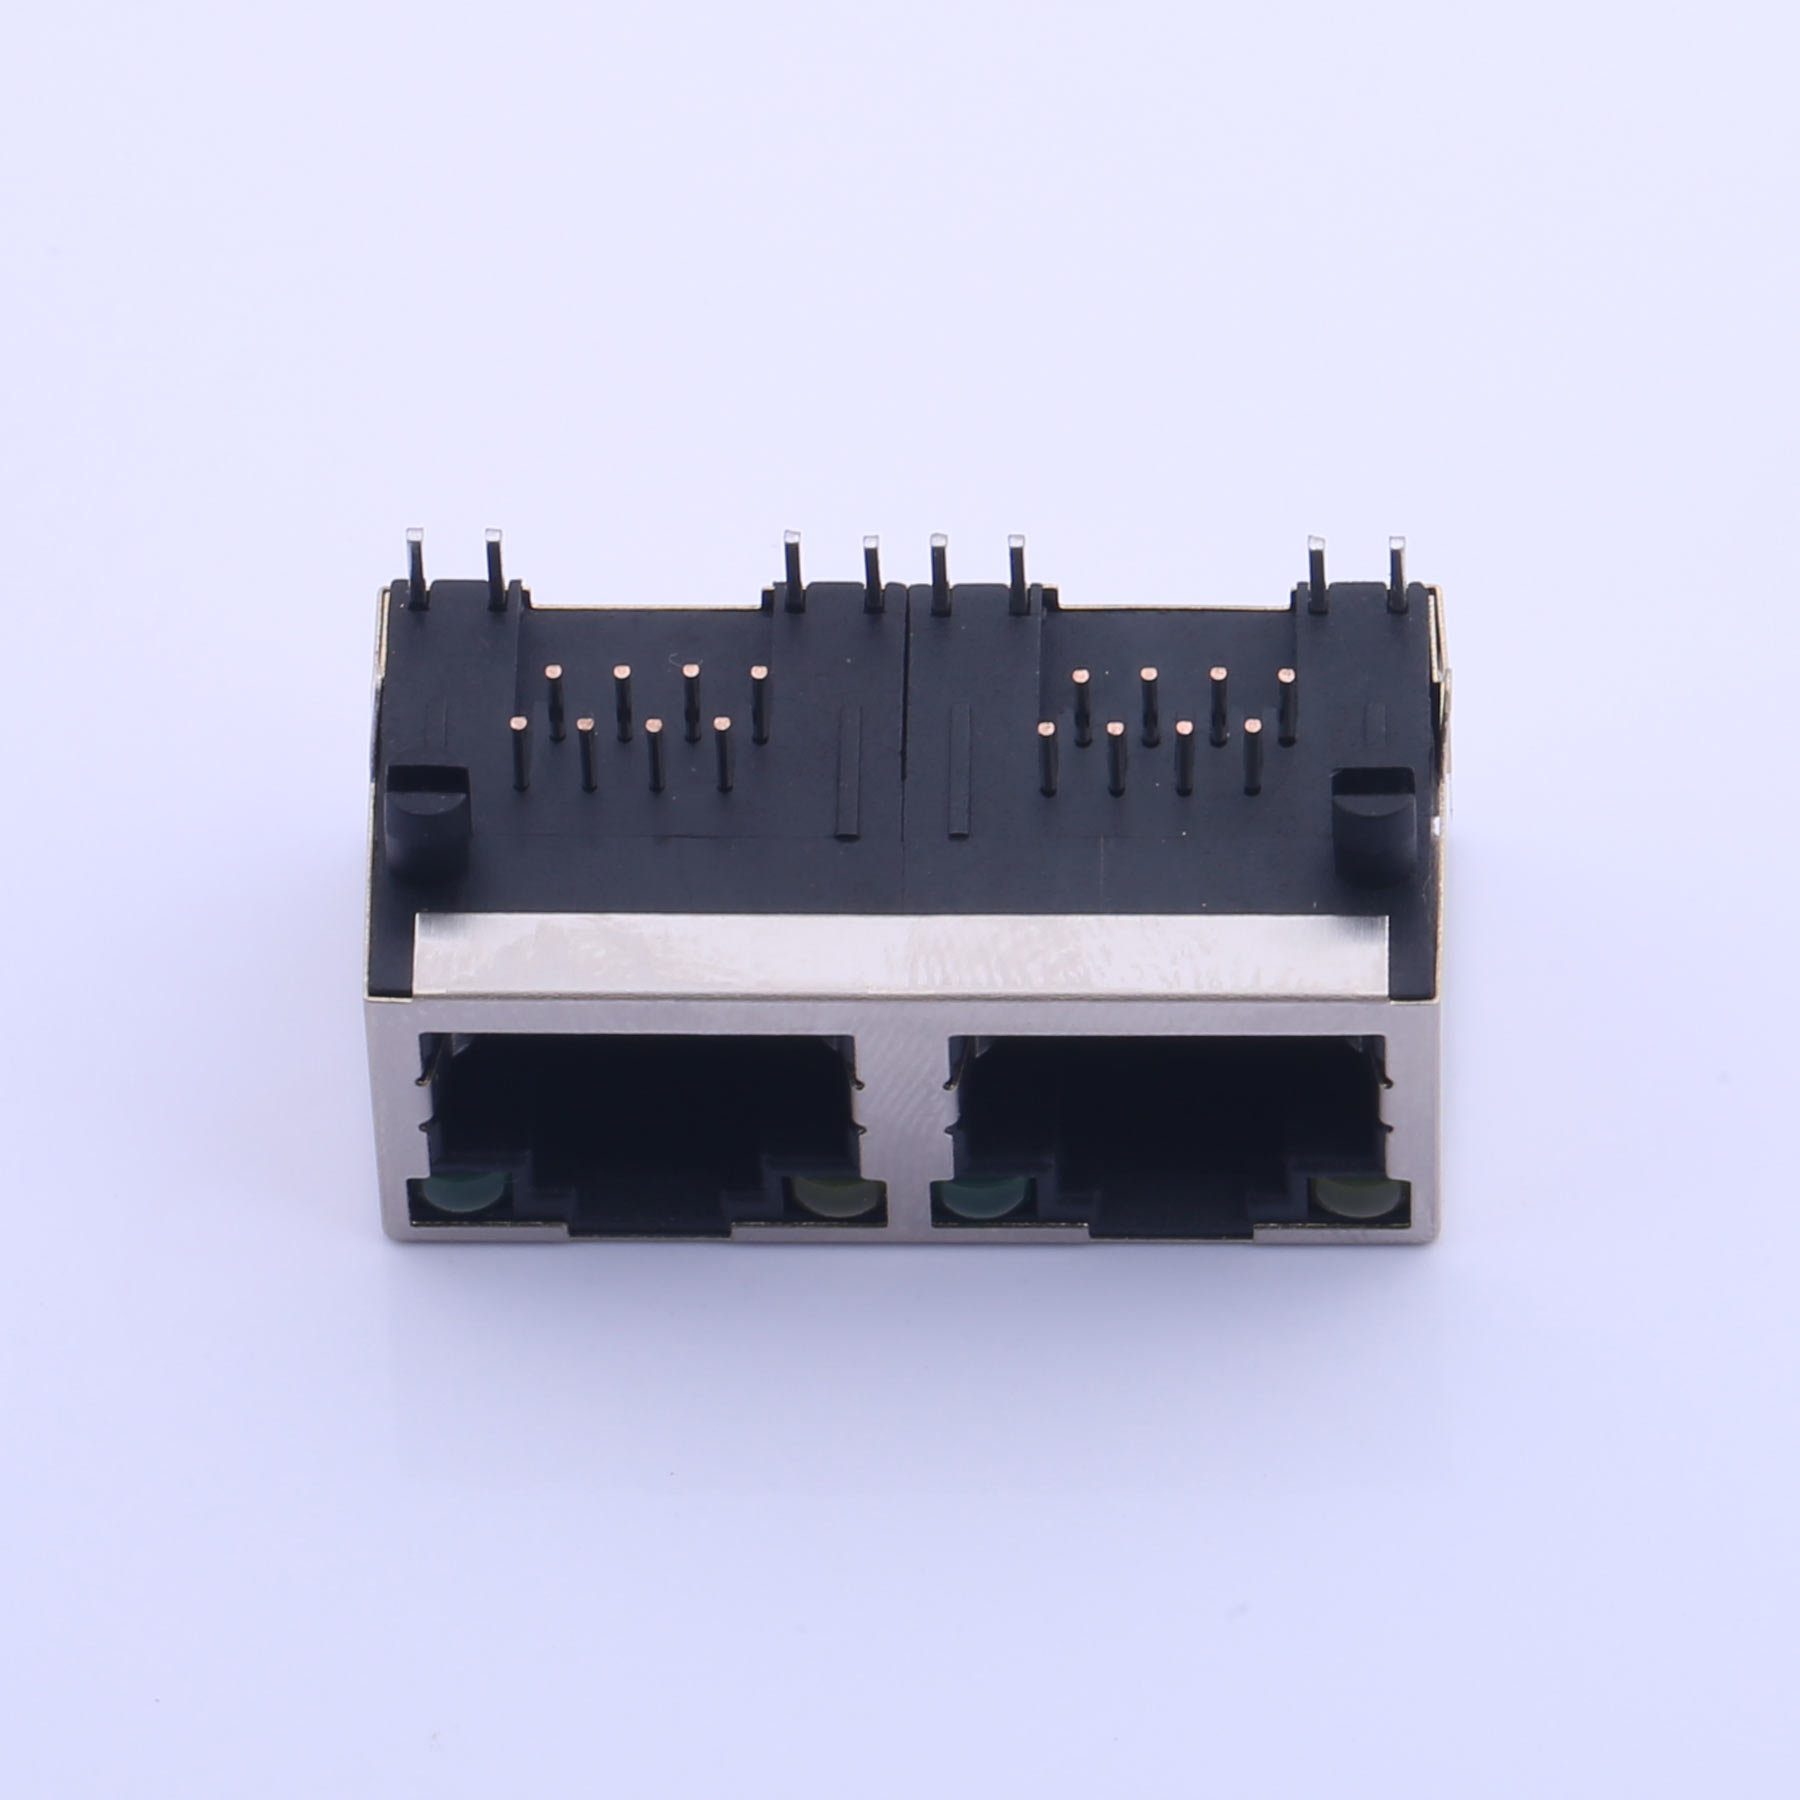 Kinghelm Network interface 1x2 port 8P8C RJ45 female Ethernet connector with LED indicator